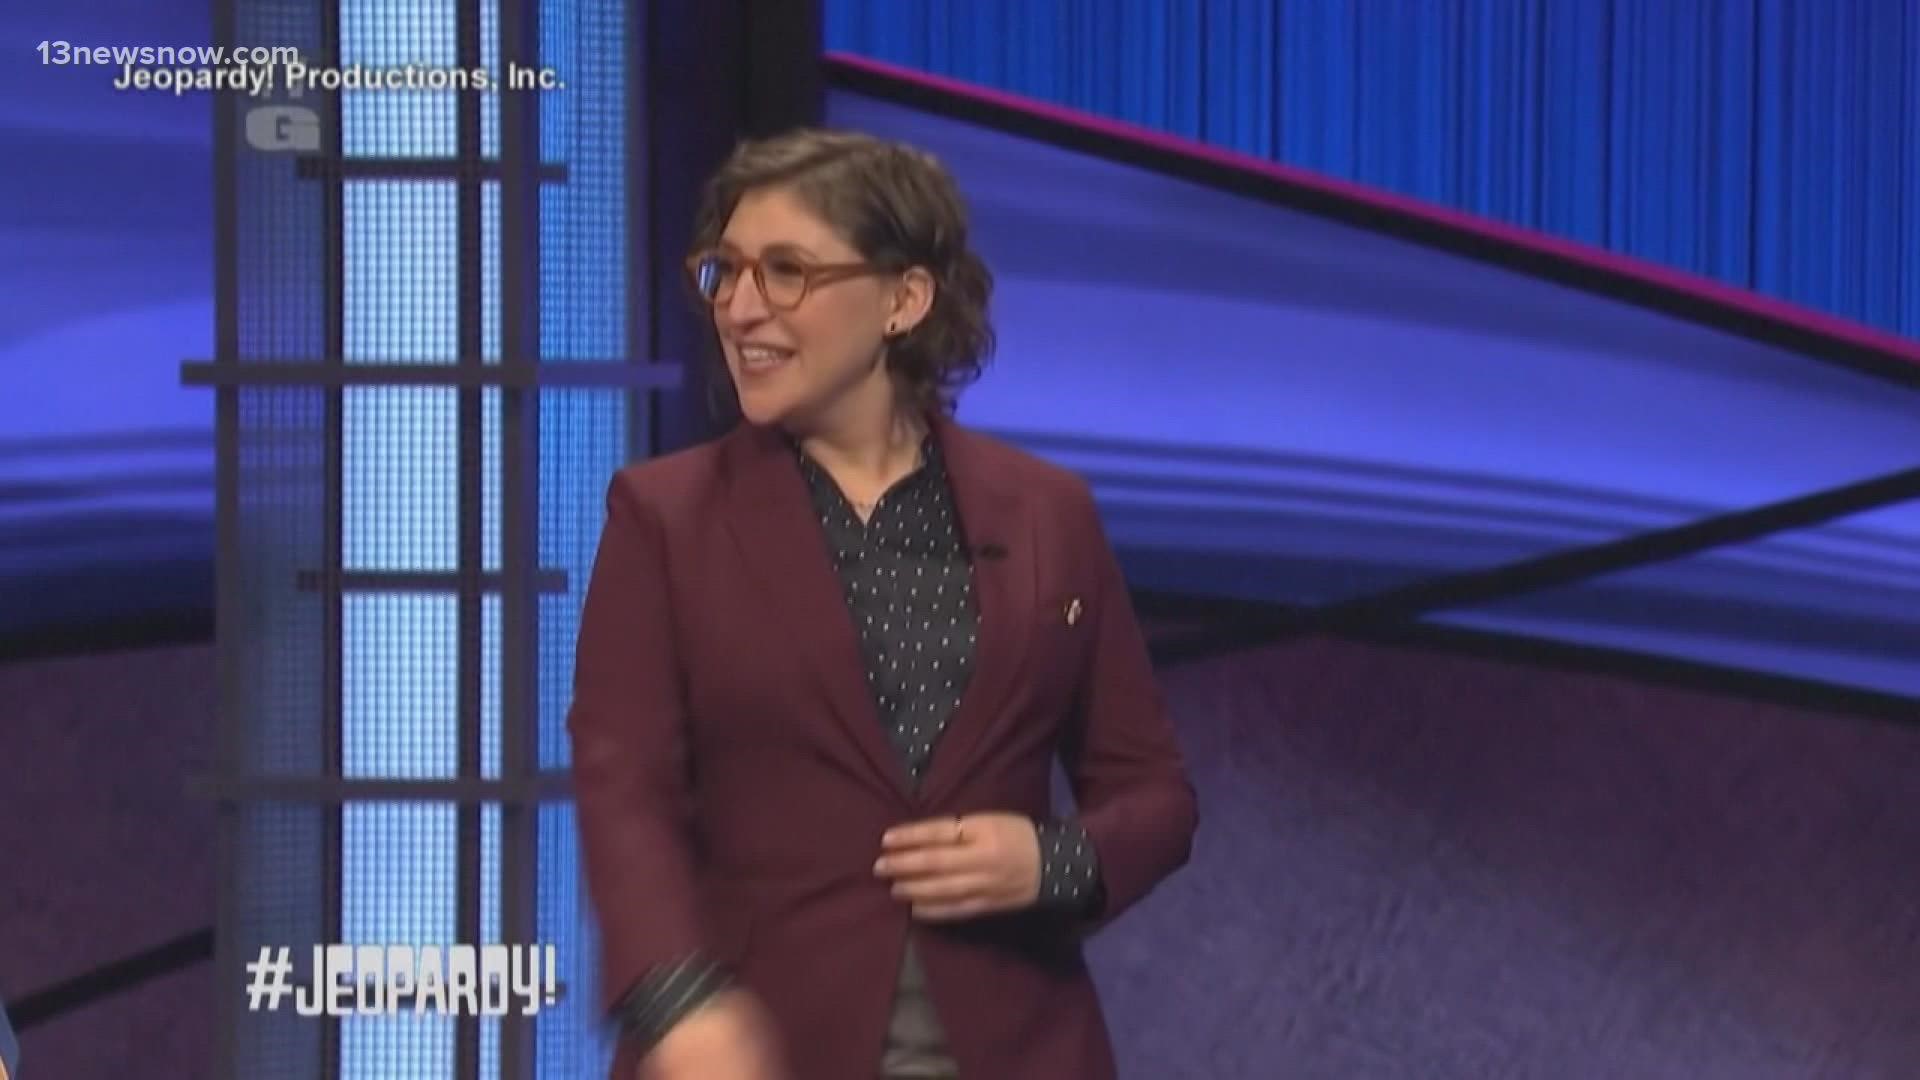 Mayim Bialik and Ken Jennings will keep splitting hosting duties as "Jeopardy!" prepares to launch its 39th season.